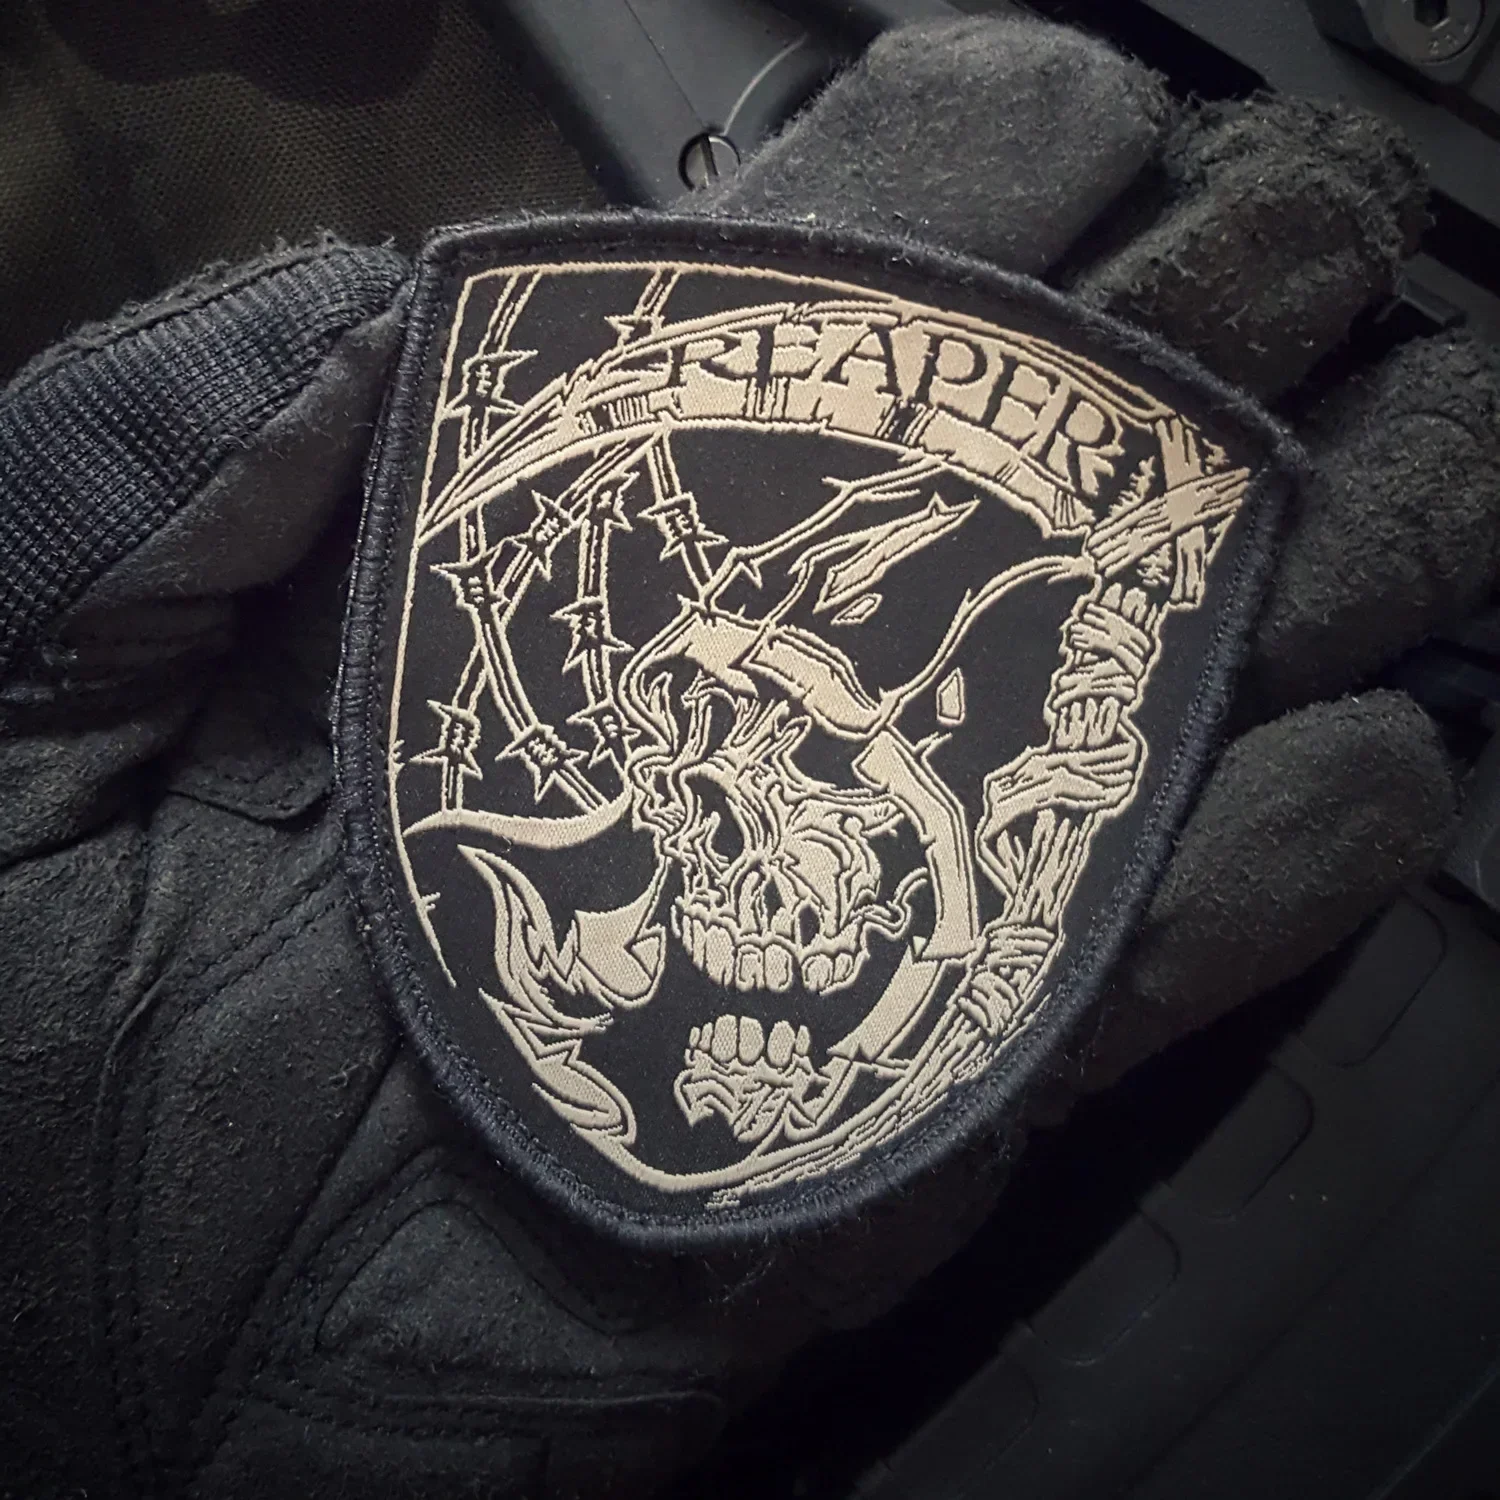 

Reaper Emblem Embroidered Hook&Loop Patches for Clothing DIY Armband Tactical Morale Badge Backpack Jacket Sticker Skull Patch